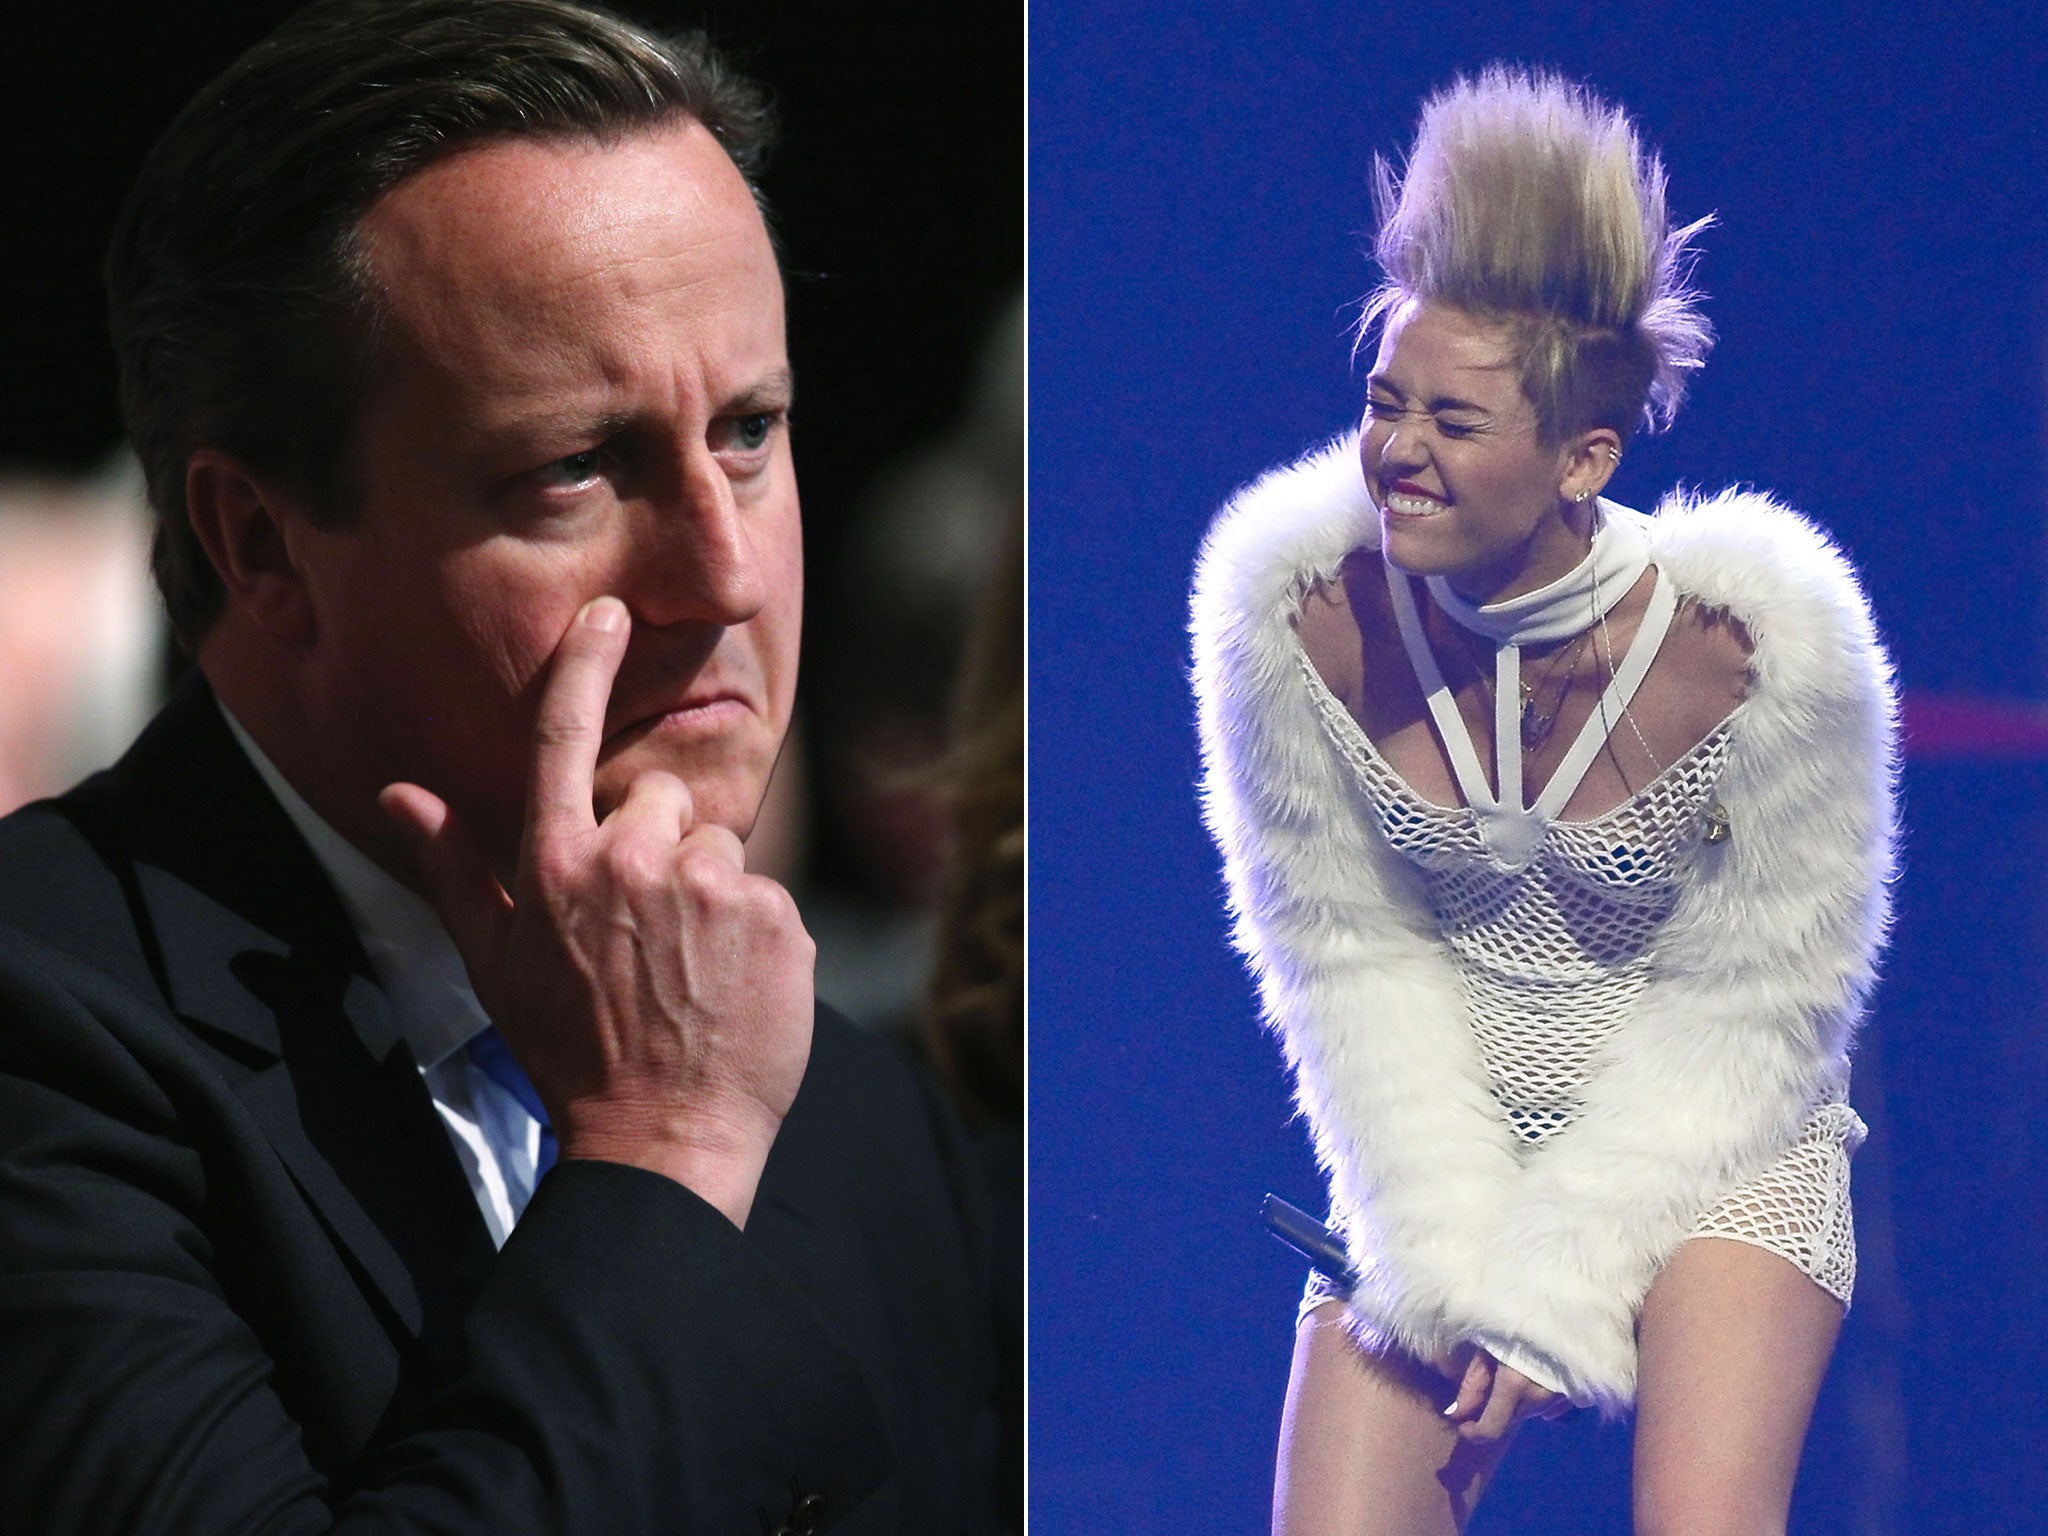 David Cameron isn't best pleased with Miley Cyrus